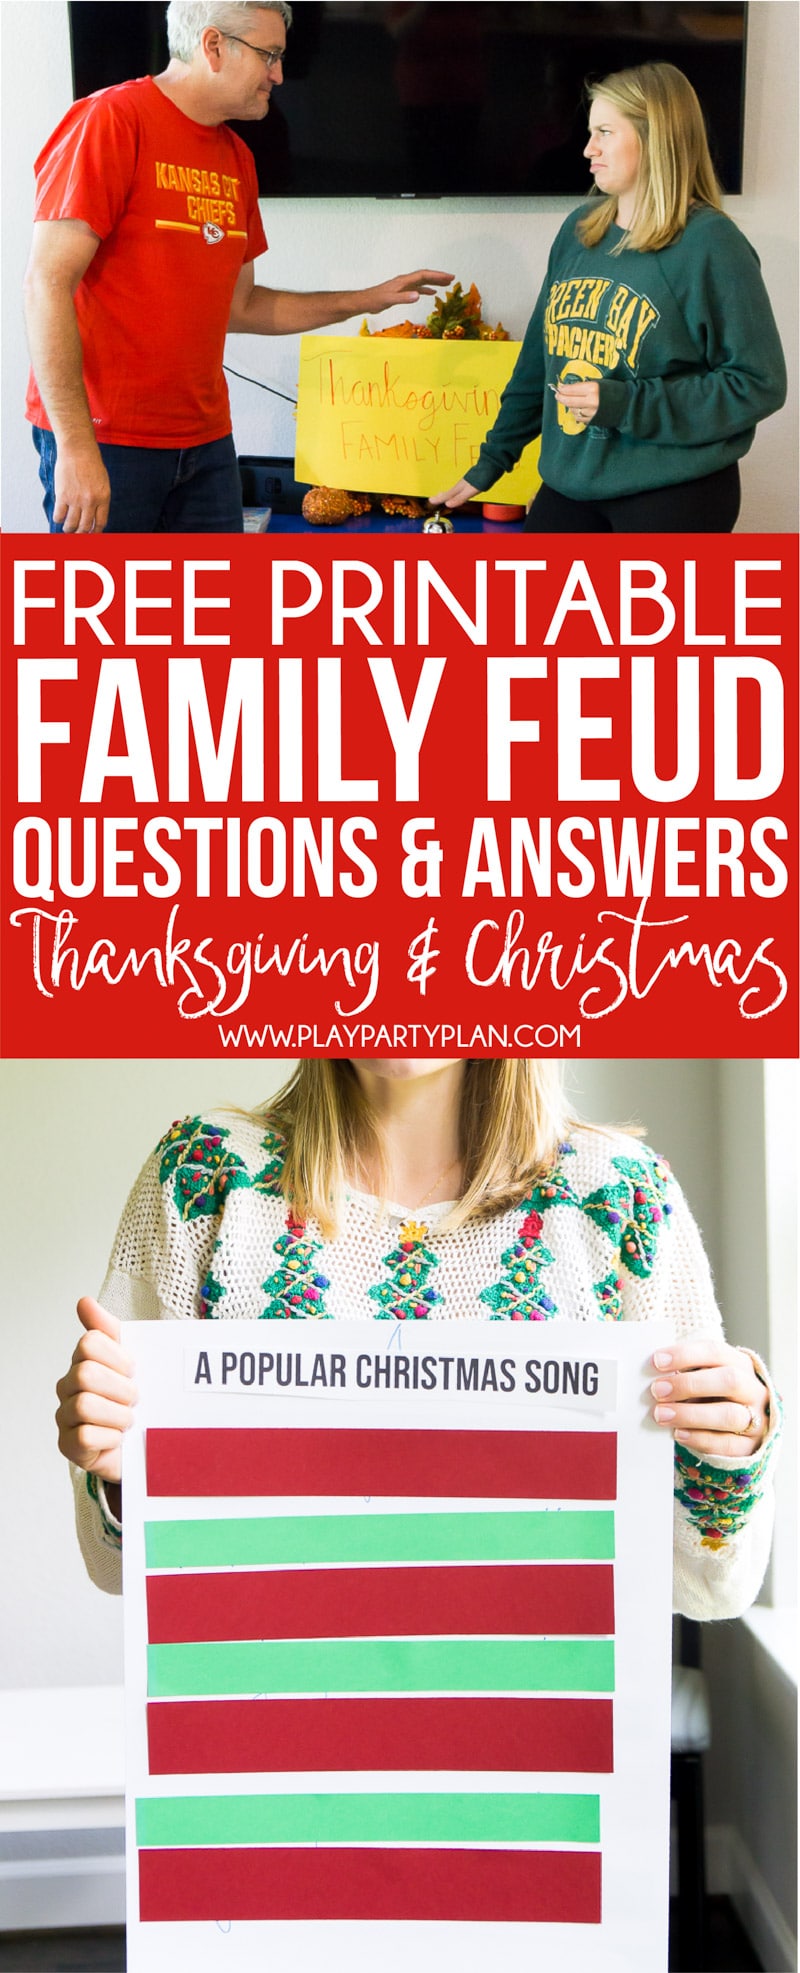 Free Thanksgiving Christmas Family Fued Questions Play Party Plan